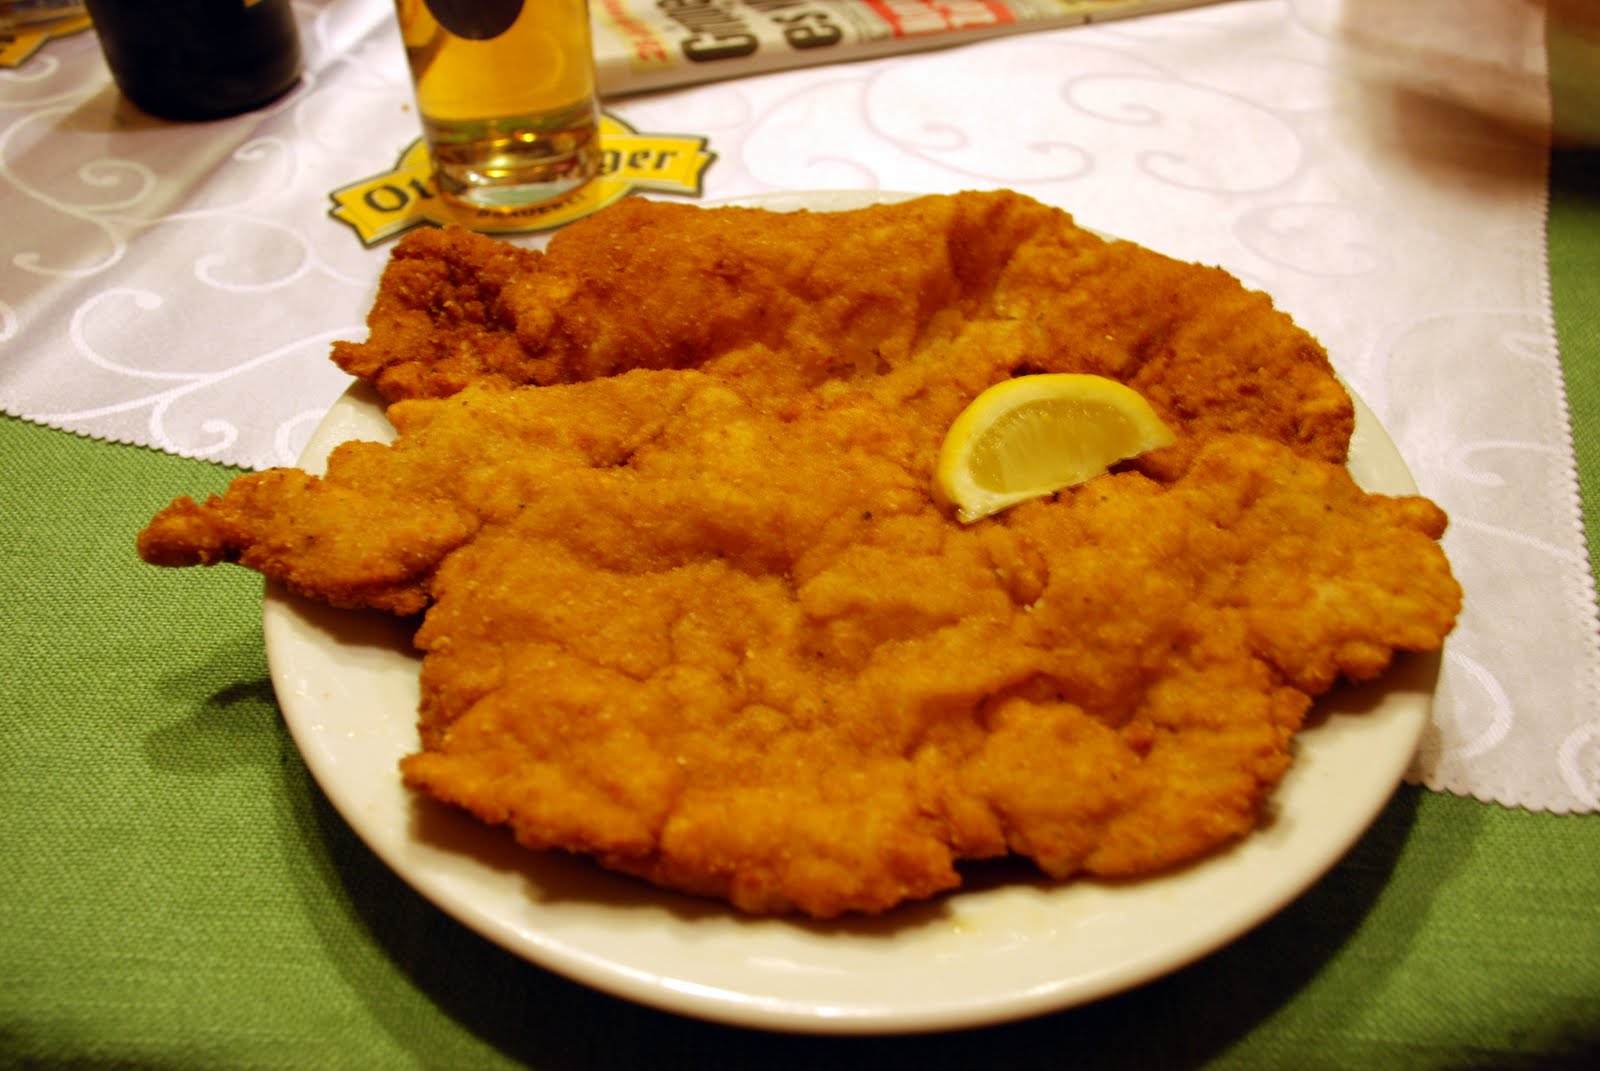 I'll Have Everything...And a Side to Go: Wienerschnitzel